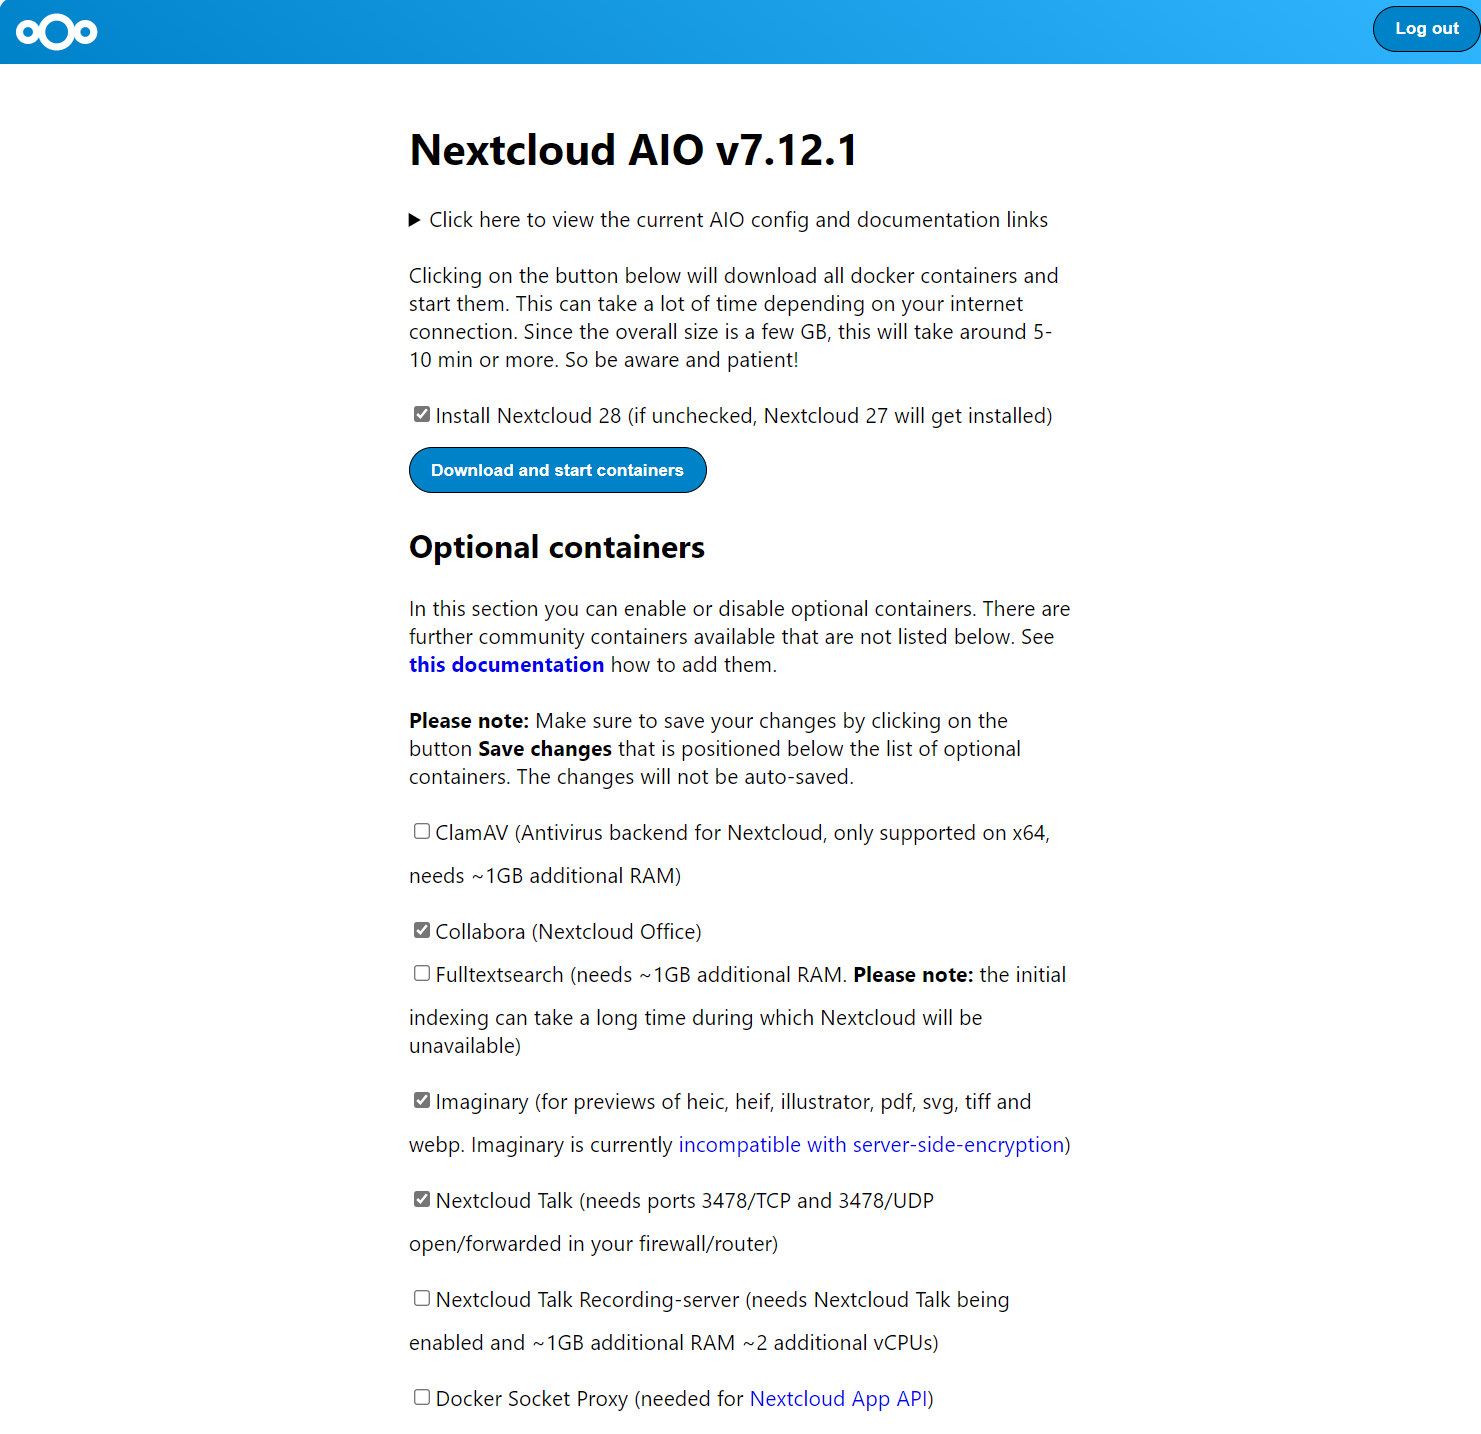 Install Nextcloud 28 체크박스 선택 후 Download and start containers 버튼 클릭